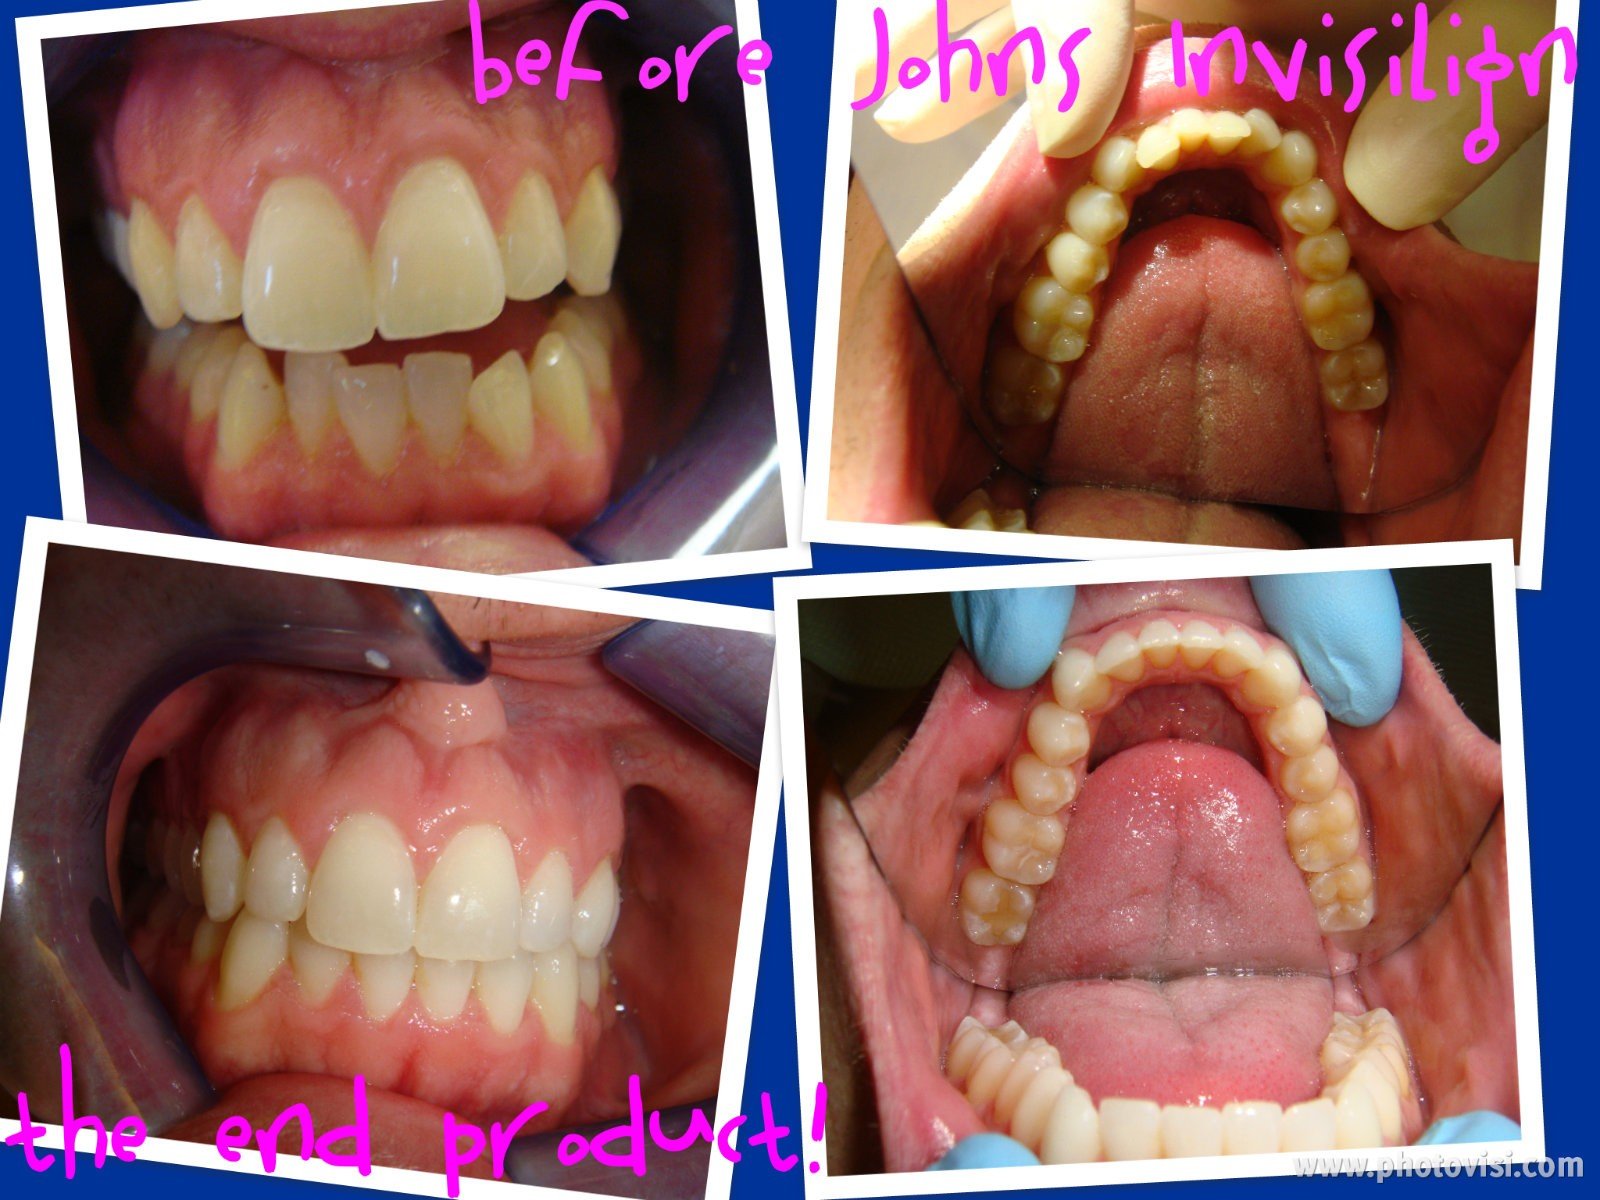 Invisalign Before & After - Advanced Dental Care Quincy, IL